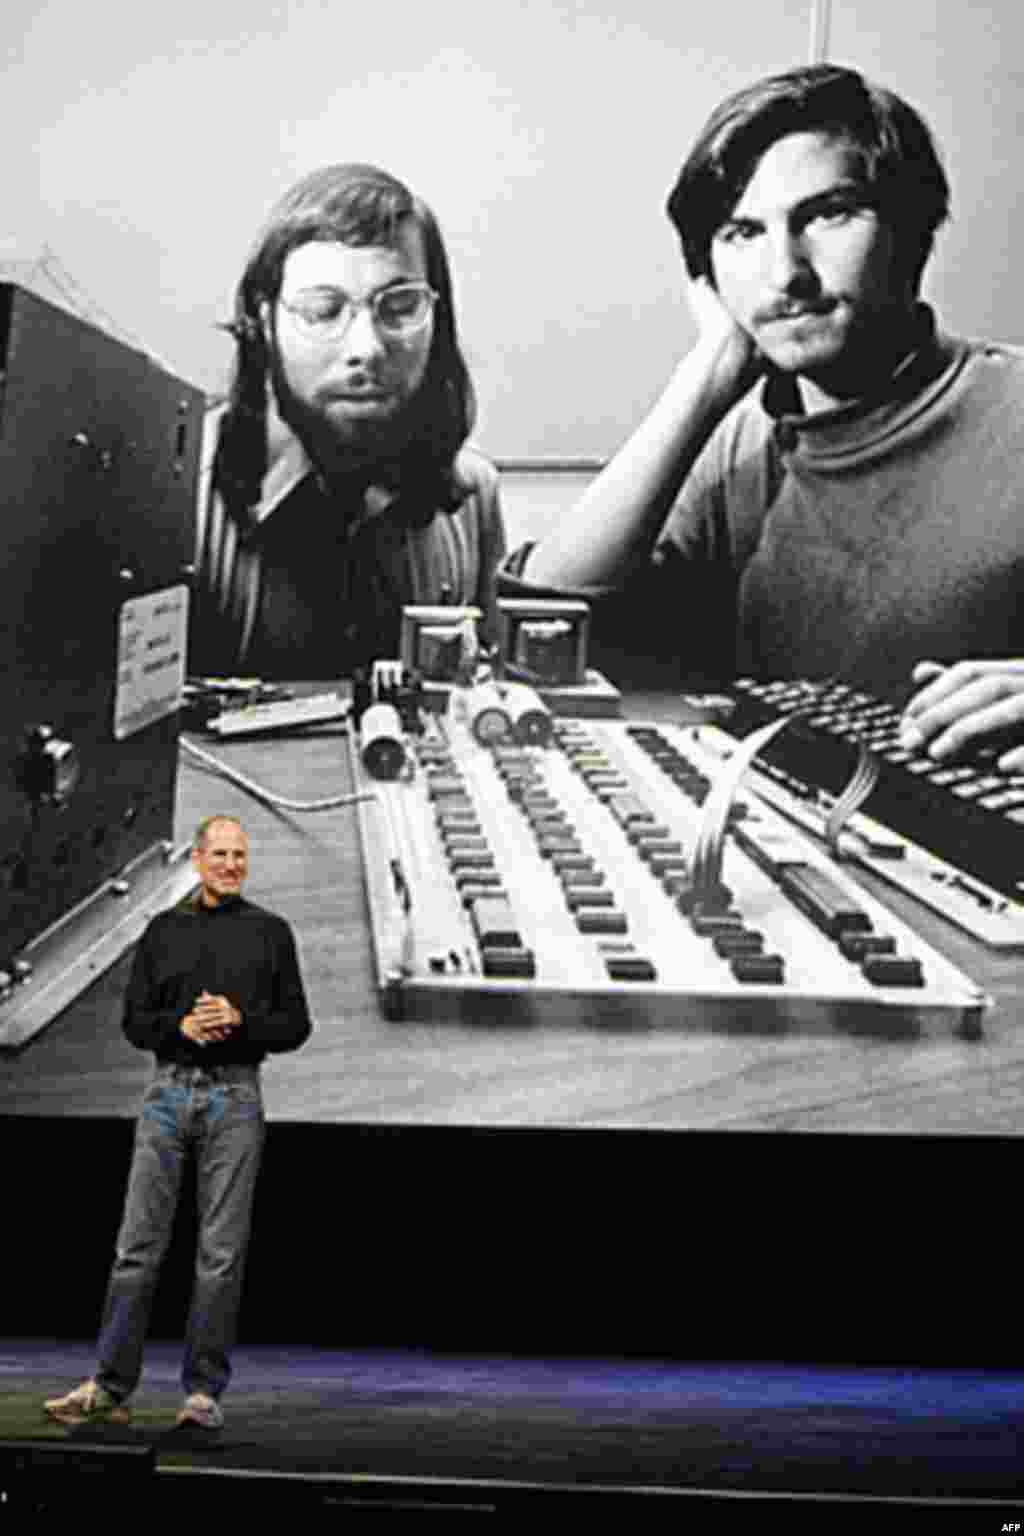 In this file photo taken January 27, 2010, Steve Jobs stands in front of a photo of himself, right, and Steve Wozniak, left, during an Apple event in San Francisco. (AP)